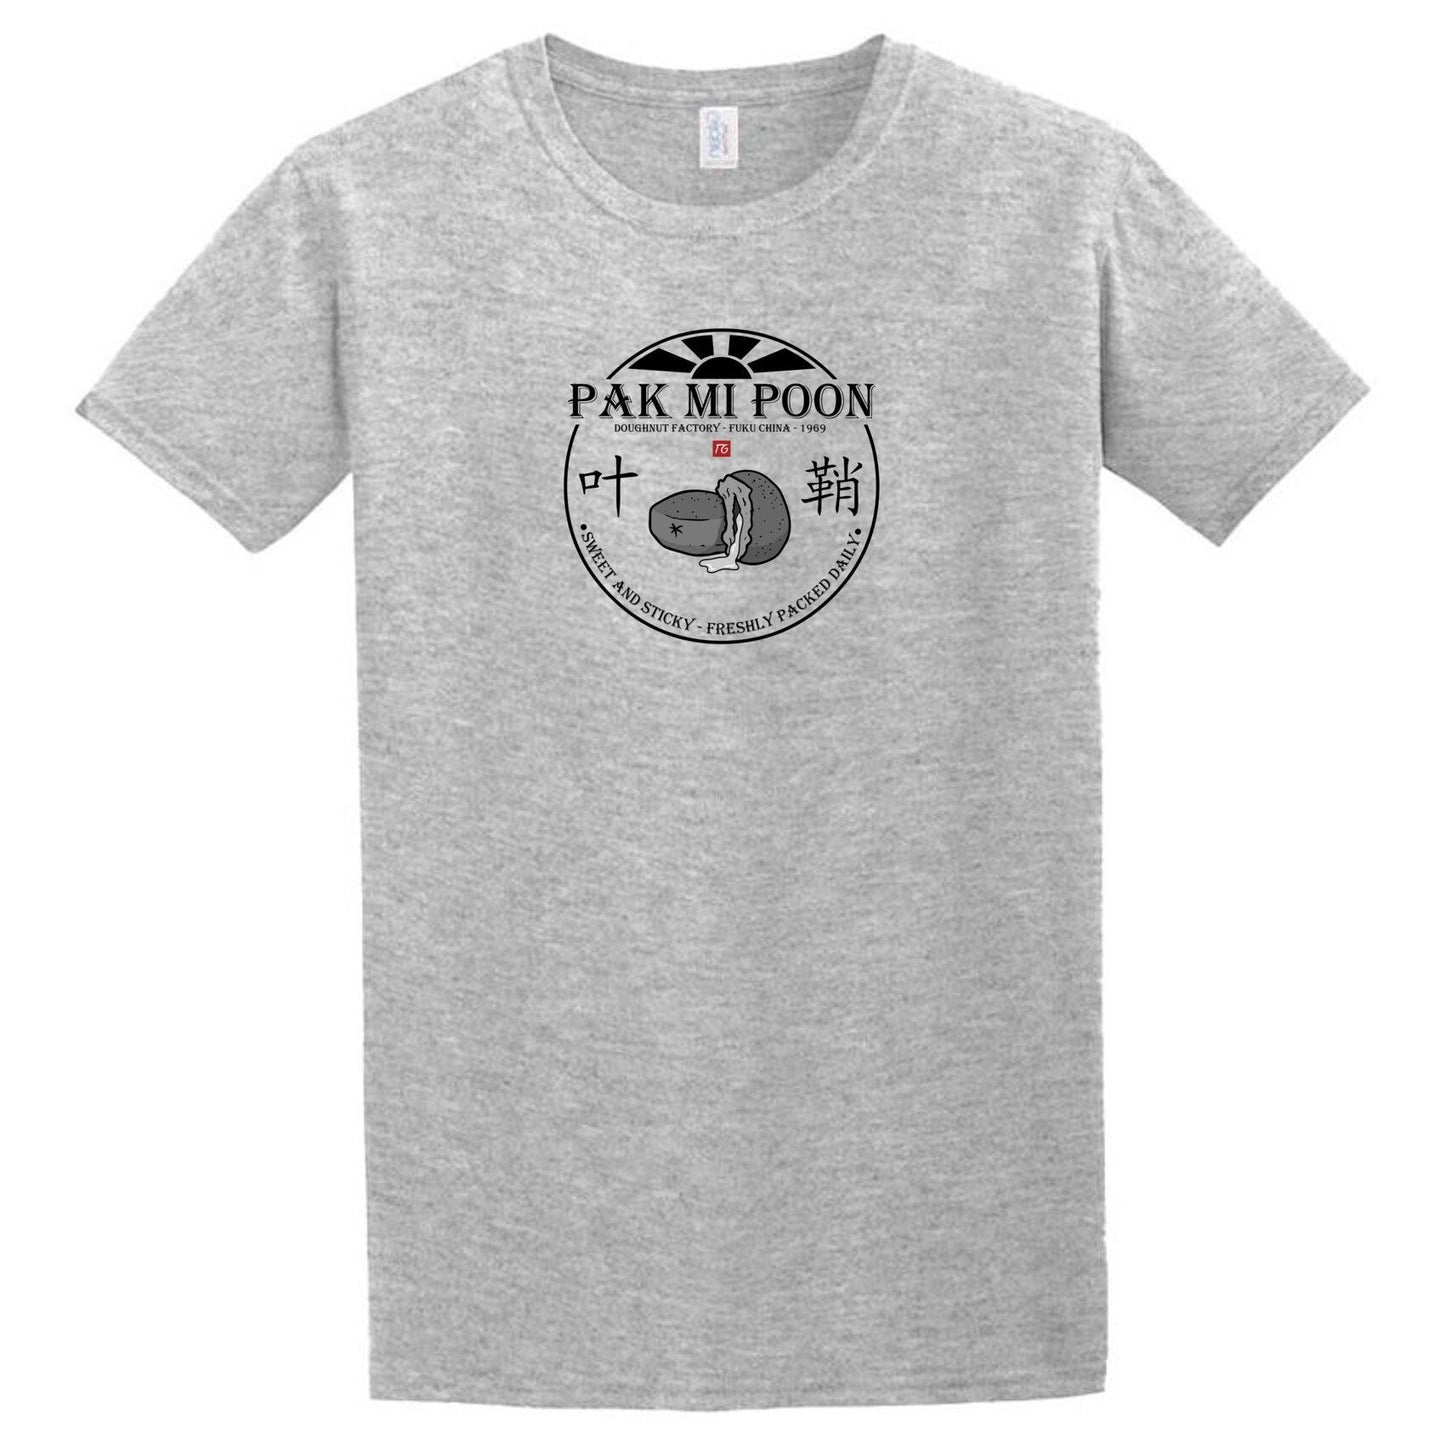 A gray Pak Mi Poon T-Shirt that says park o' pooh, from the Twisted Gifts brand.